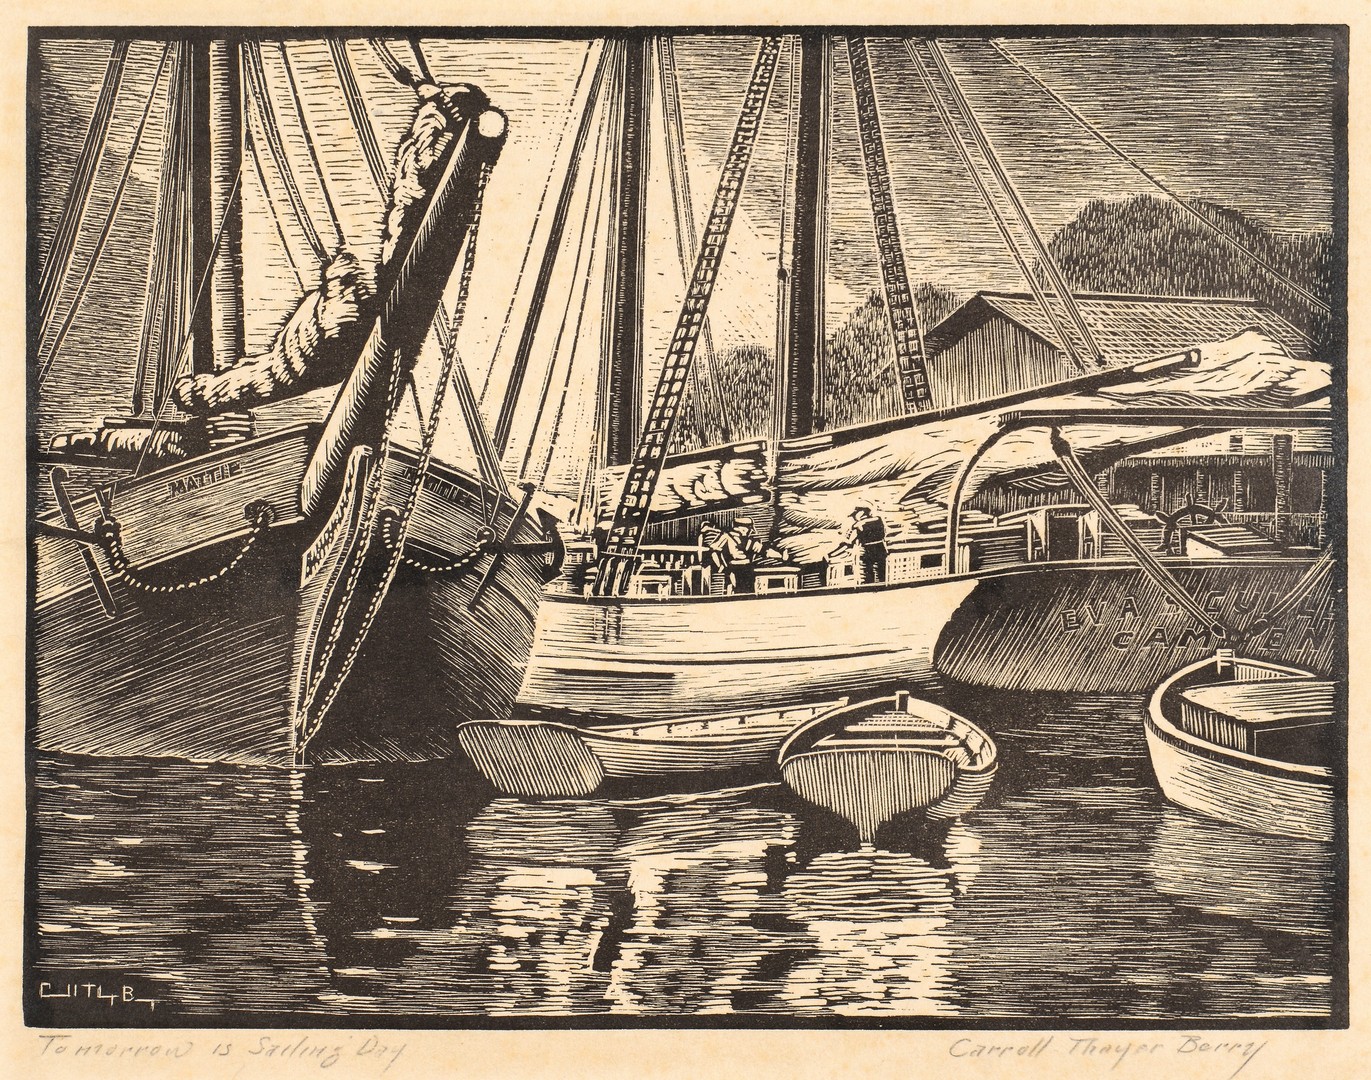 Lot 706: 3 Carroll Thayer Berry woodblock works